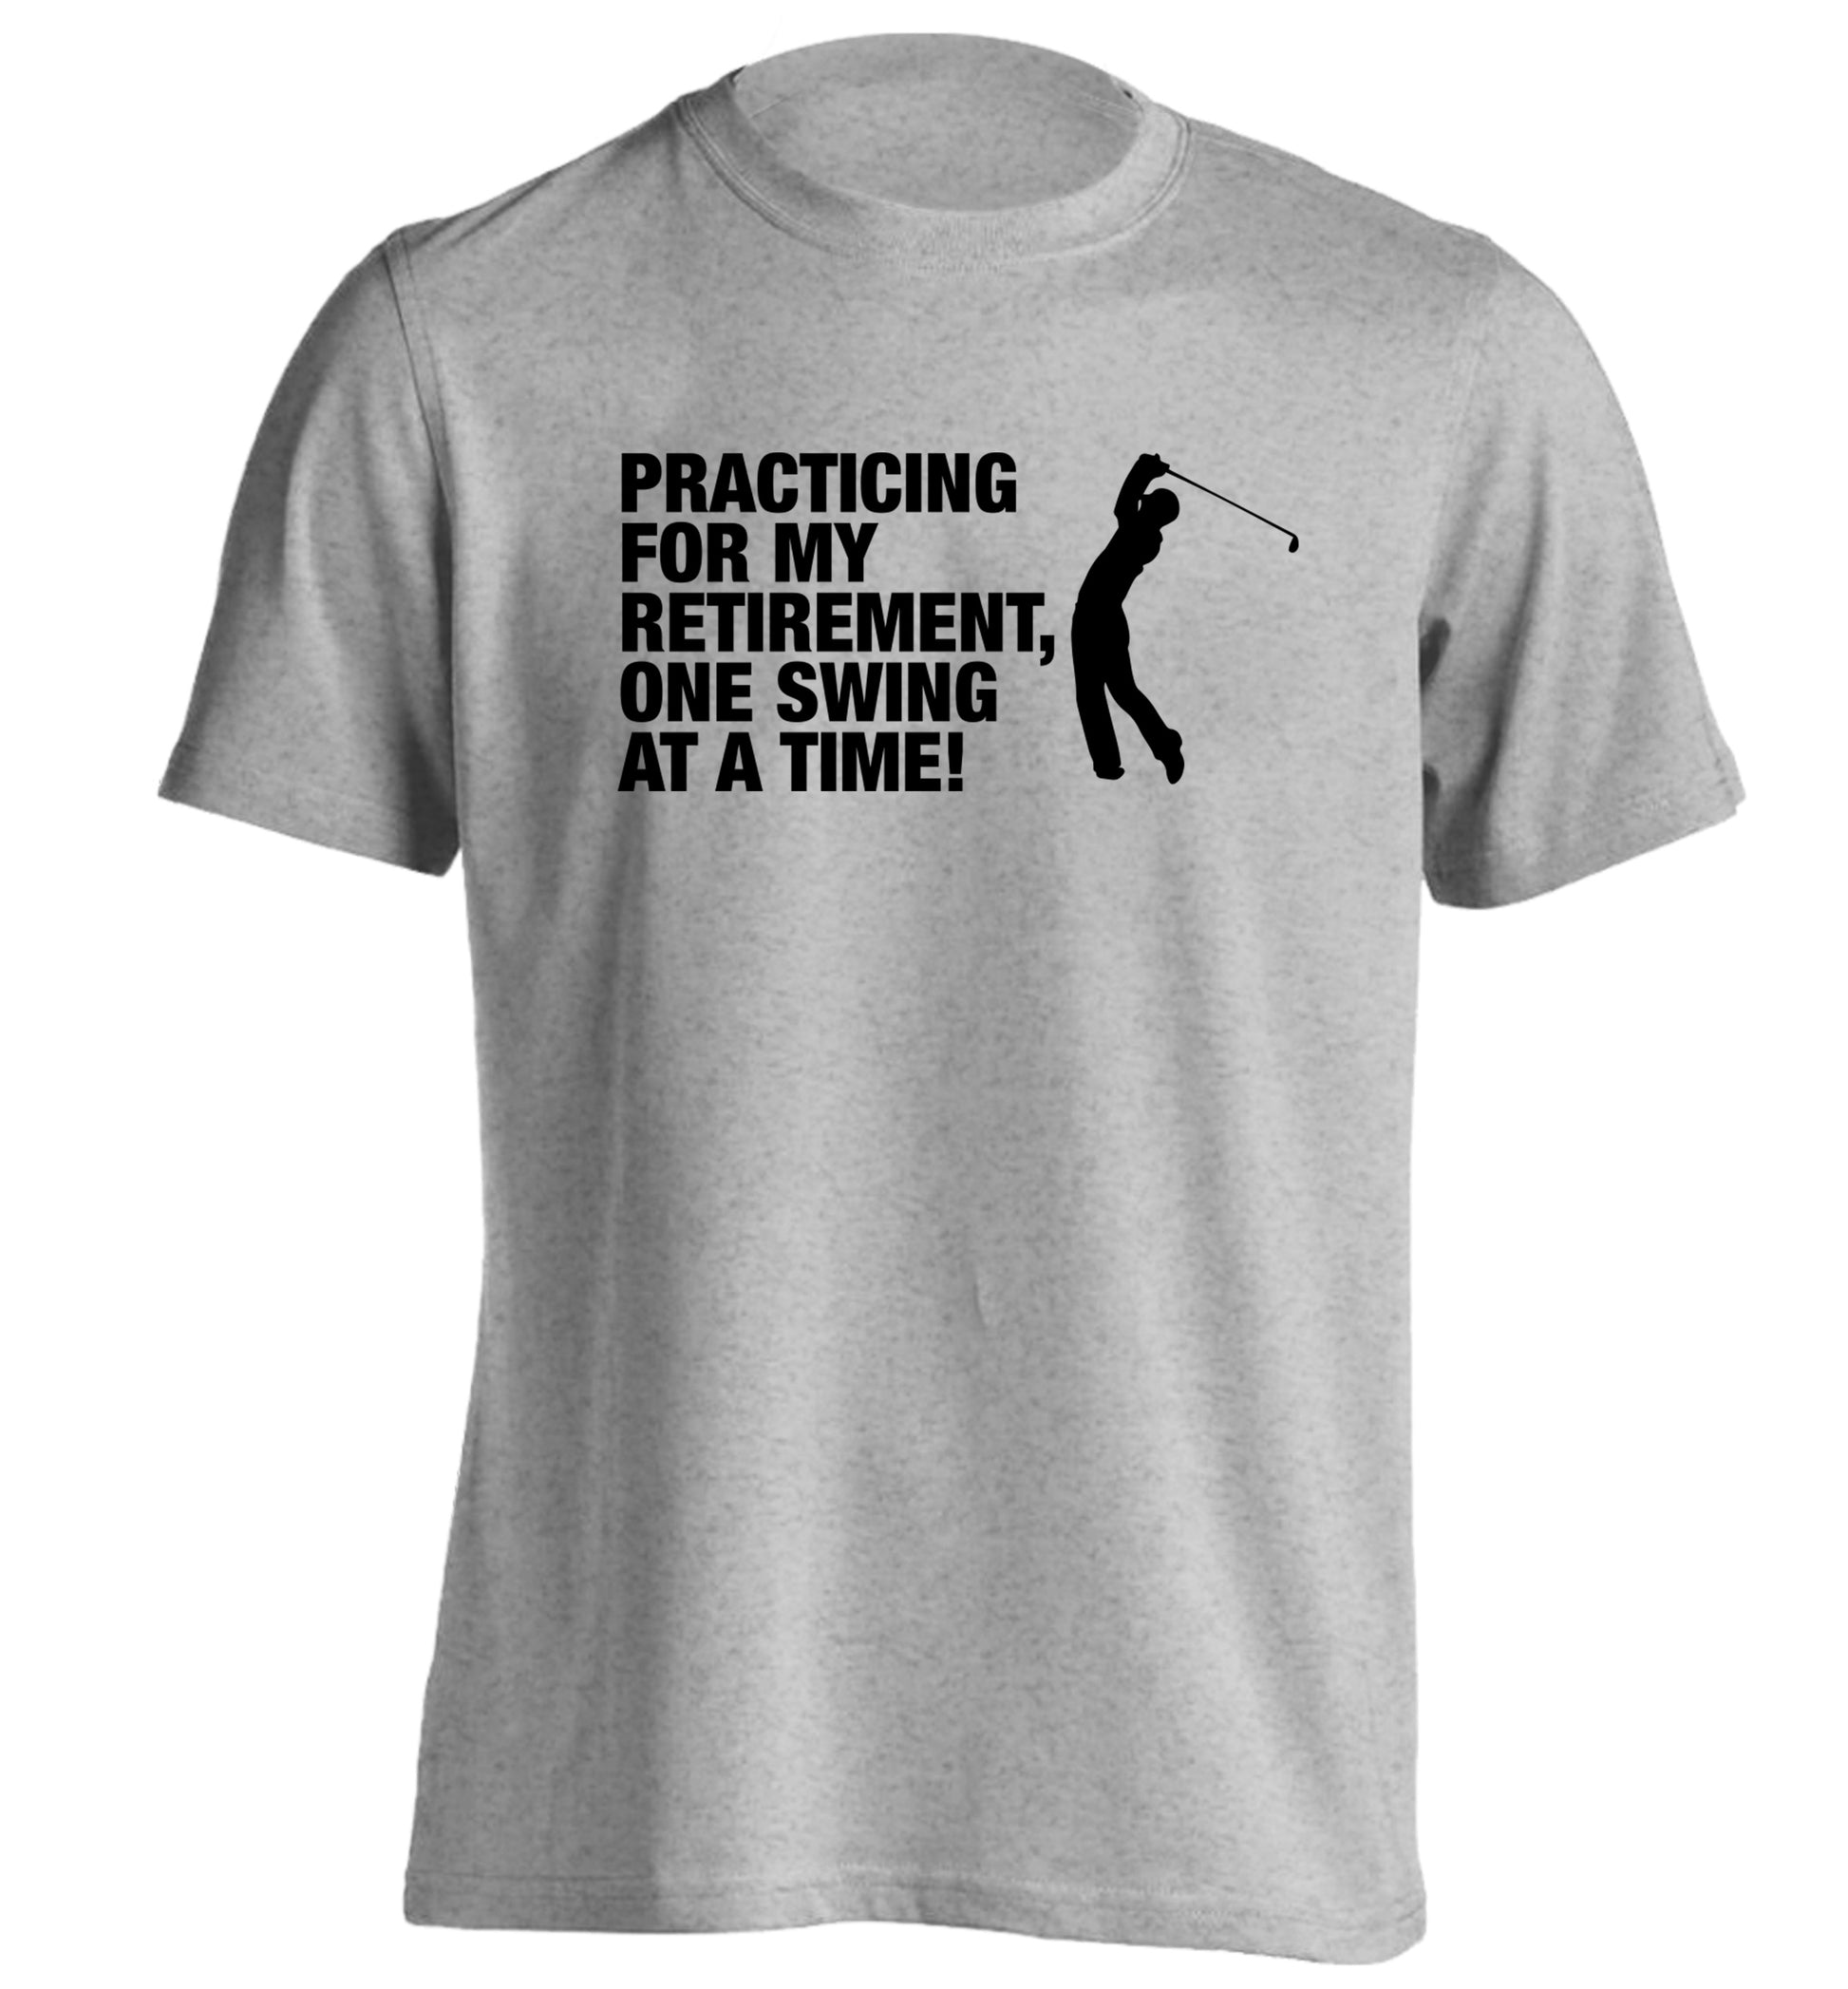 Practicing for my retirement one swing at a time adults unisex grey Tshirt 2XL